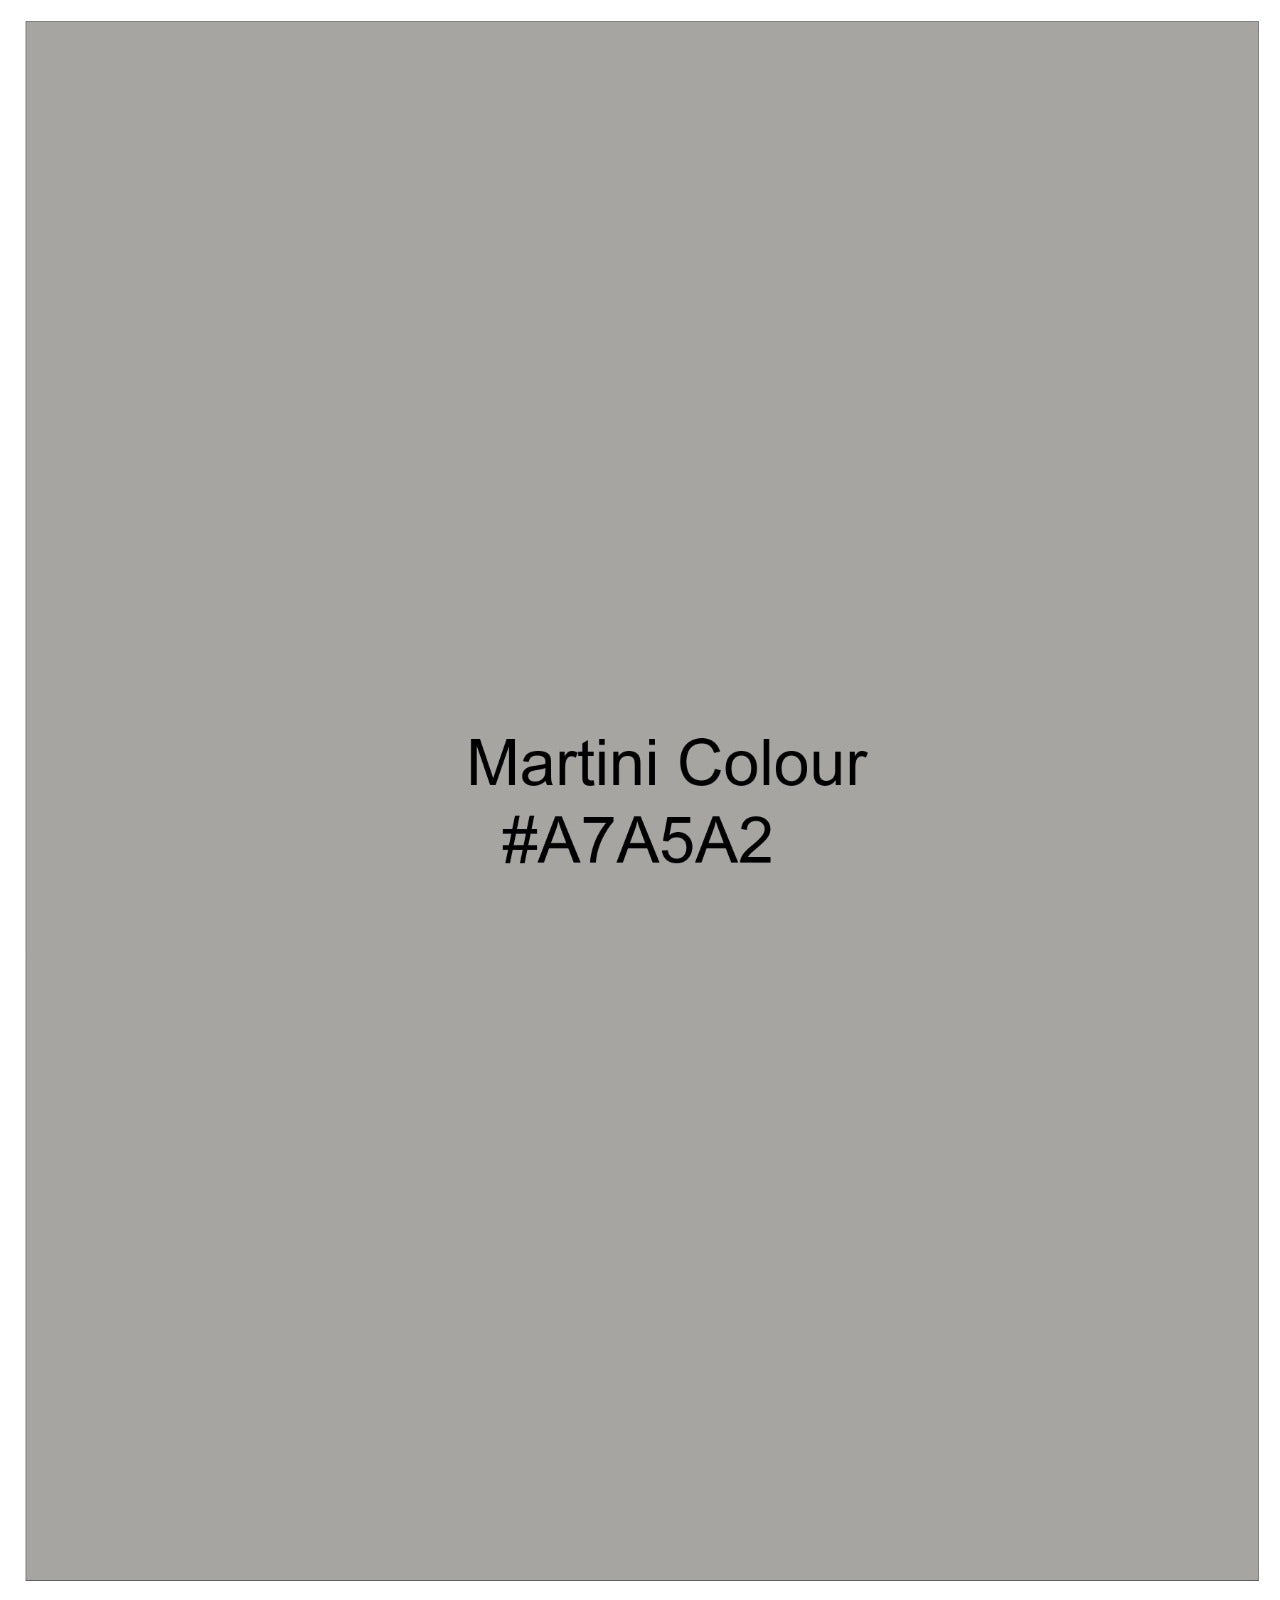 Martini Gray Stretchable Double Breasted Premium Cotton Traveler Suit ST2668-DB-36, ST2668-DB-38, ST2668-DB-40, ST2668-DB-42, ST2668-DB-44, ST2668-DB-46, ST2668-DB-48, ST2668-DB-50, ST2668-DB-52, ST2668-DB-54, ST2668-DB-56, ST2668-DB-58, ST2668-DB-60